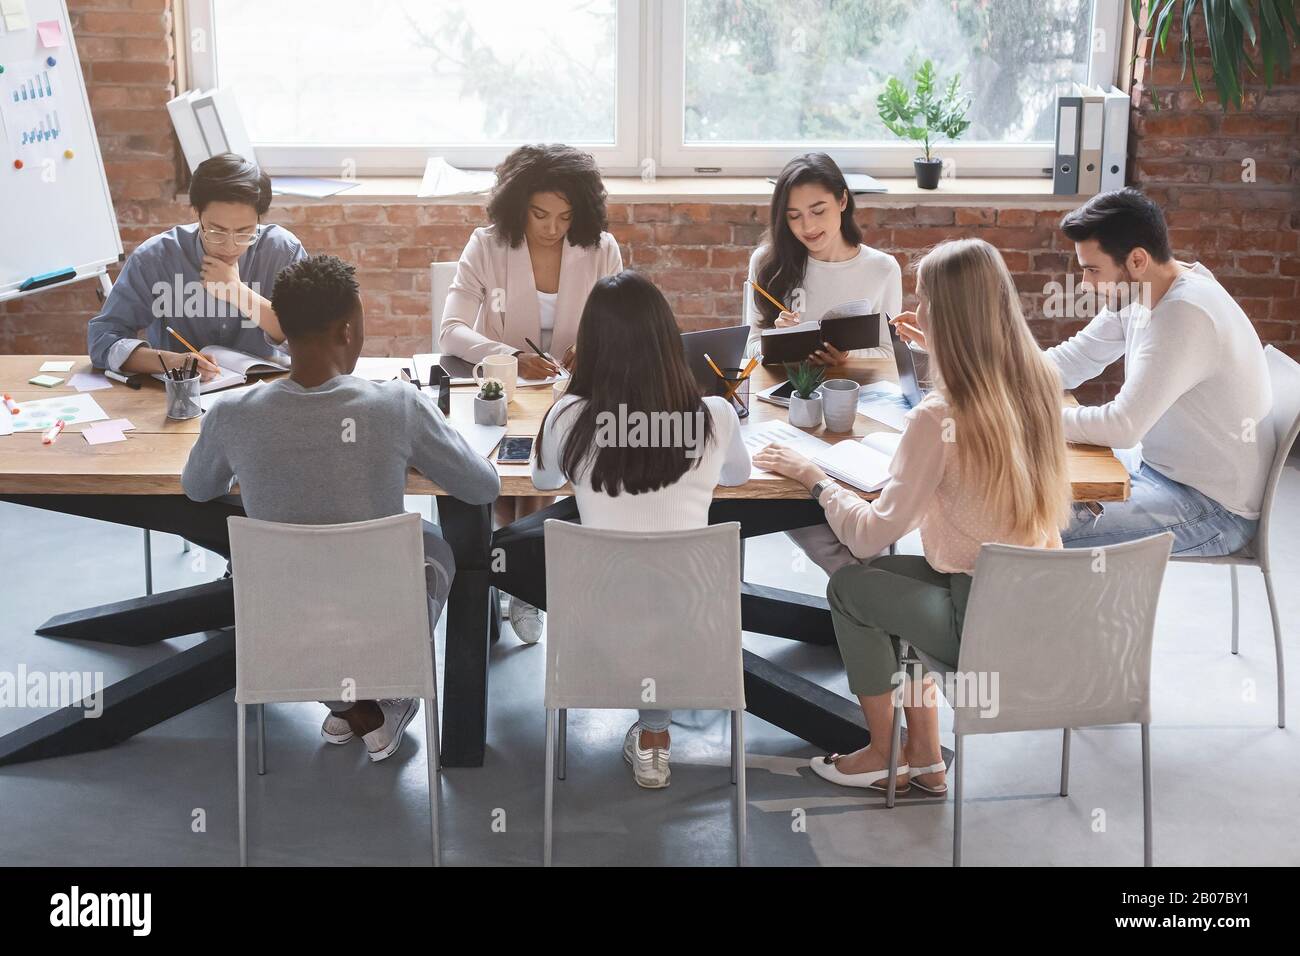 Business meeting of young creative team, office interior Stock Photo